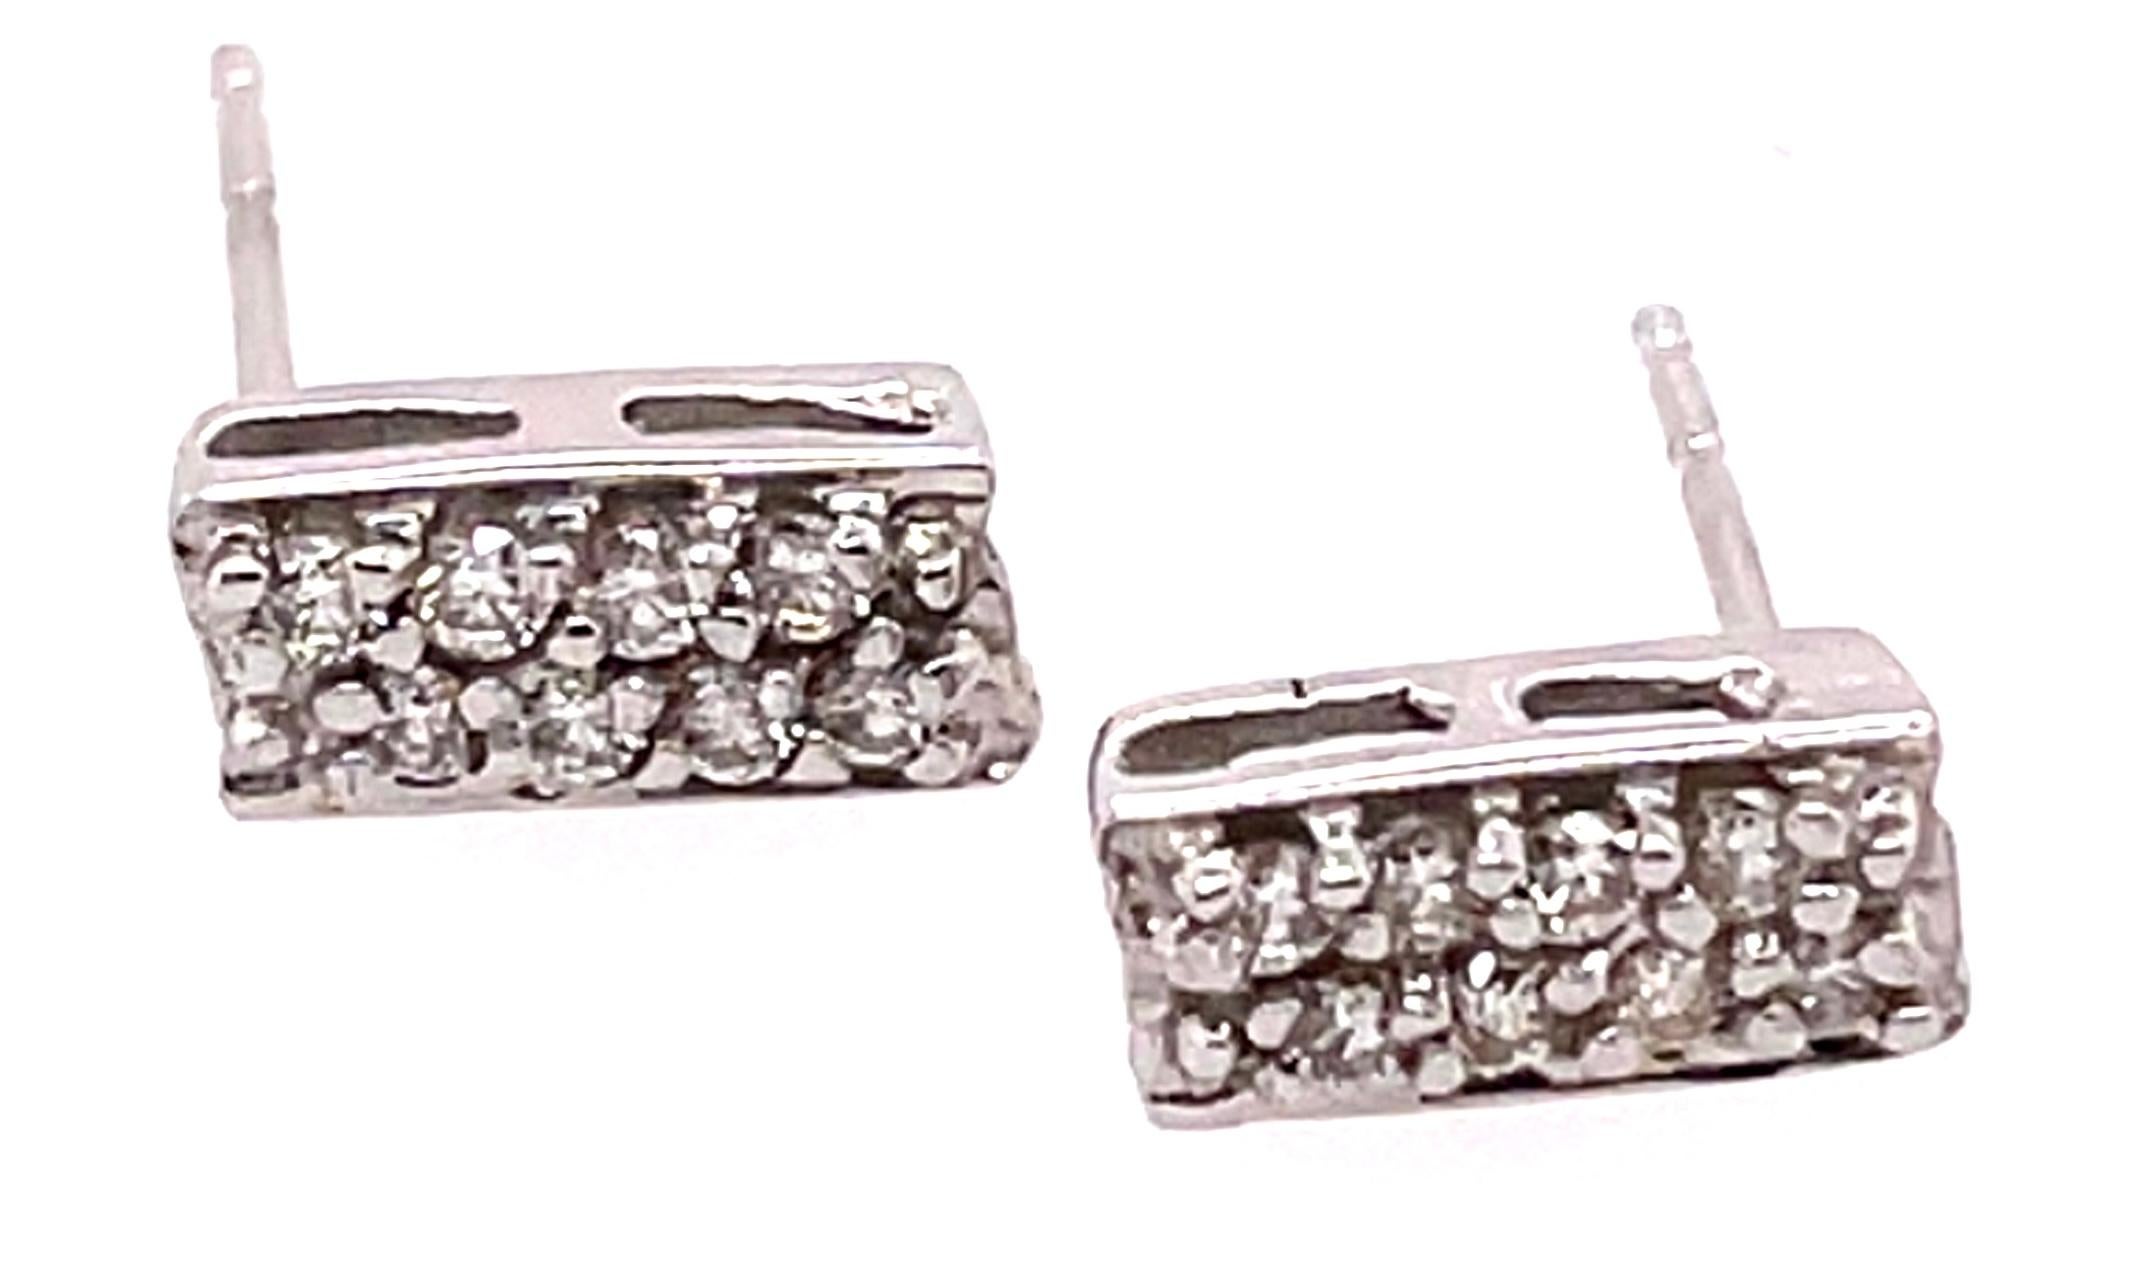 14 Karat White Gold Fancy Earrings with Round Diamonds.
22 pcs of diamonds with 1.20 total diamond weight 
2 grams total weight.
